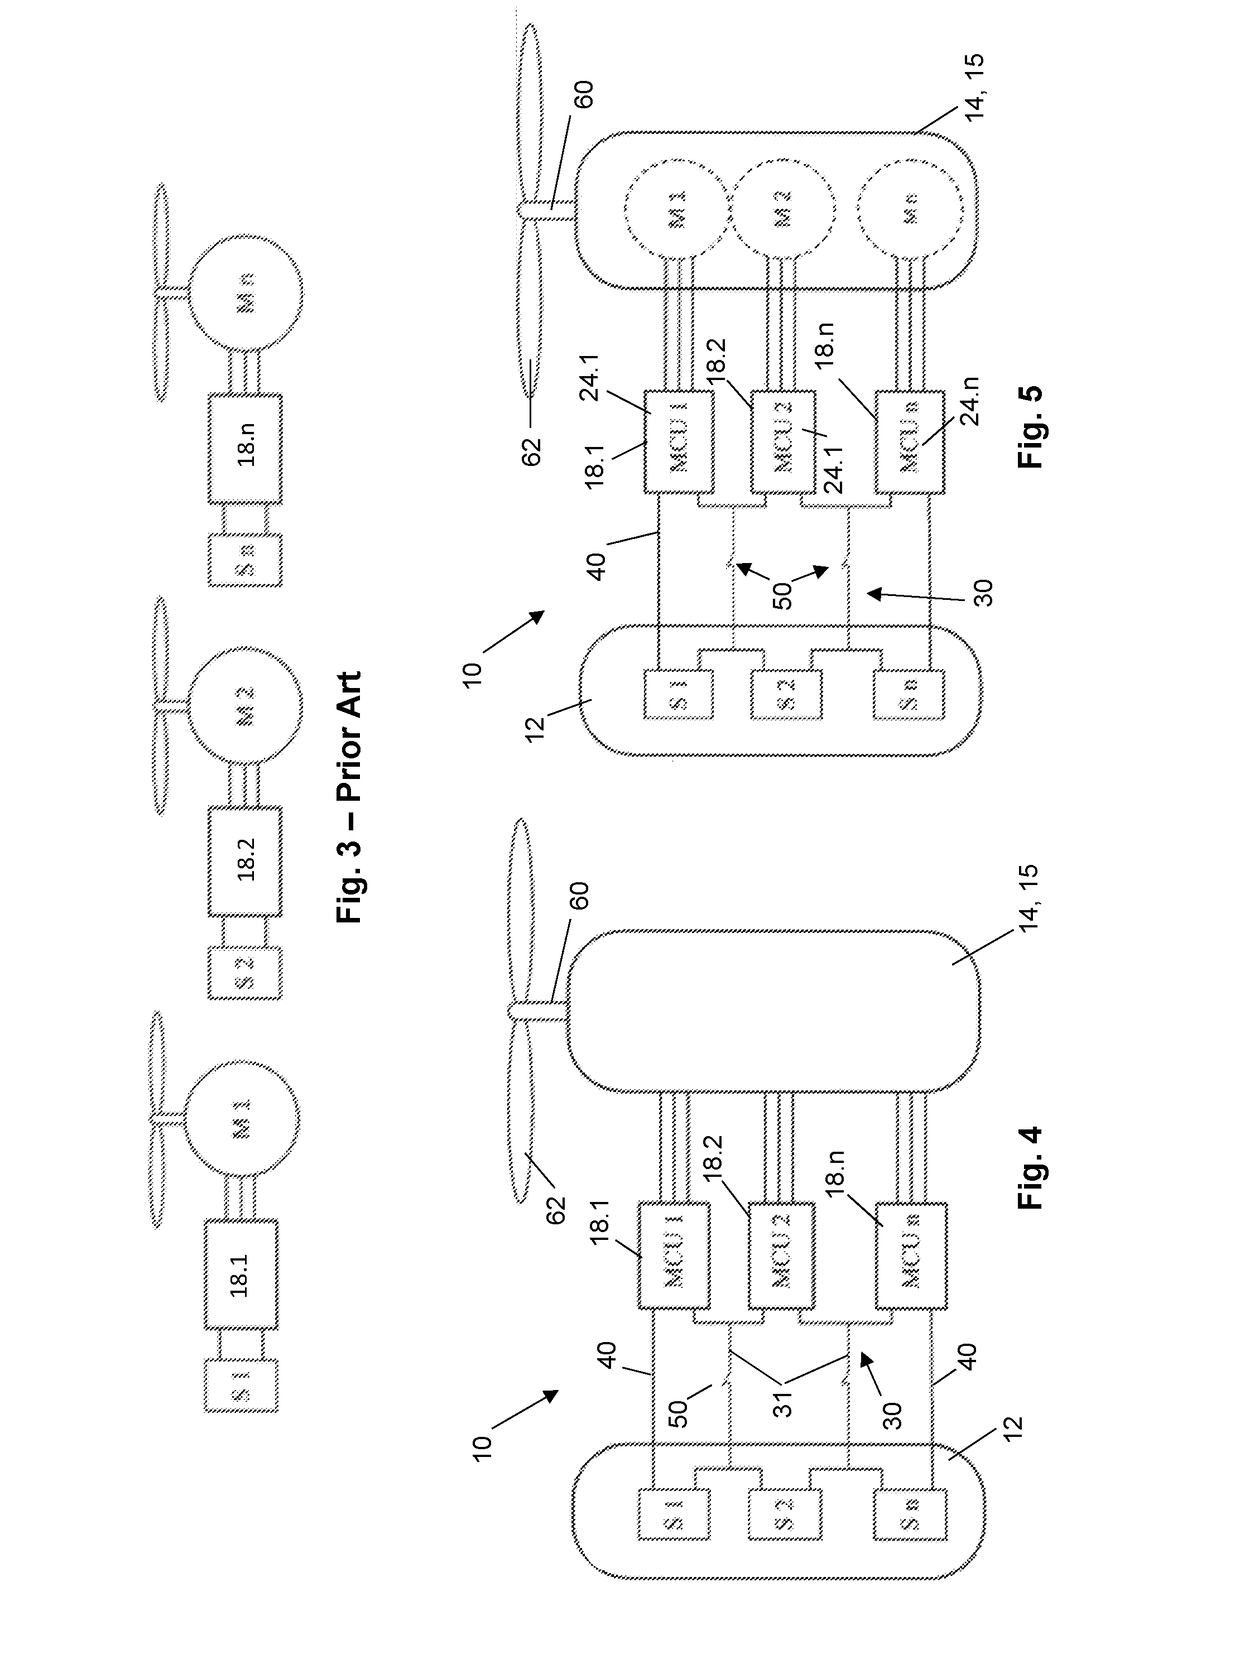 Electrical drive system for an aircraft and operating method